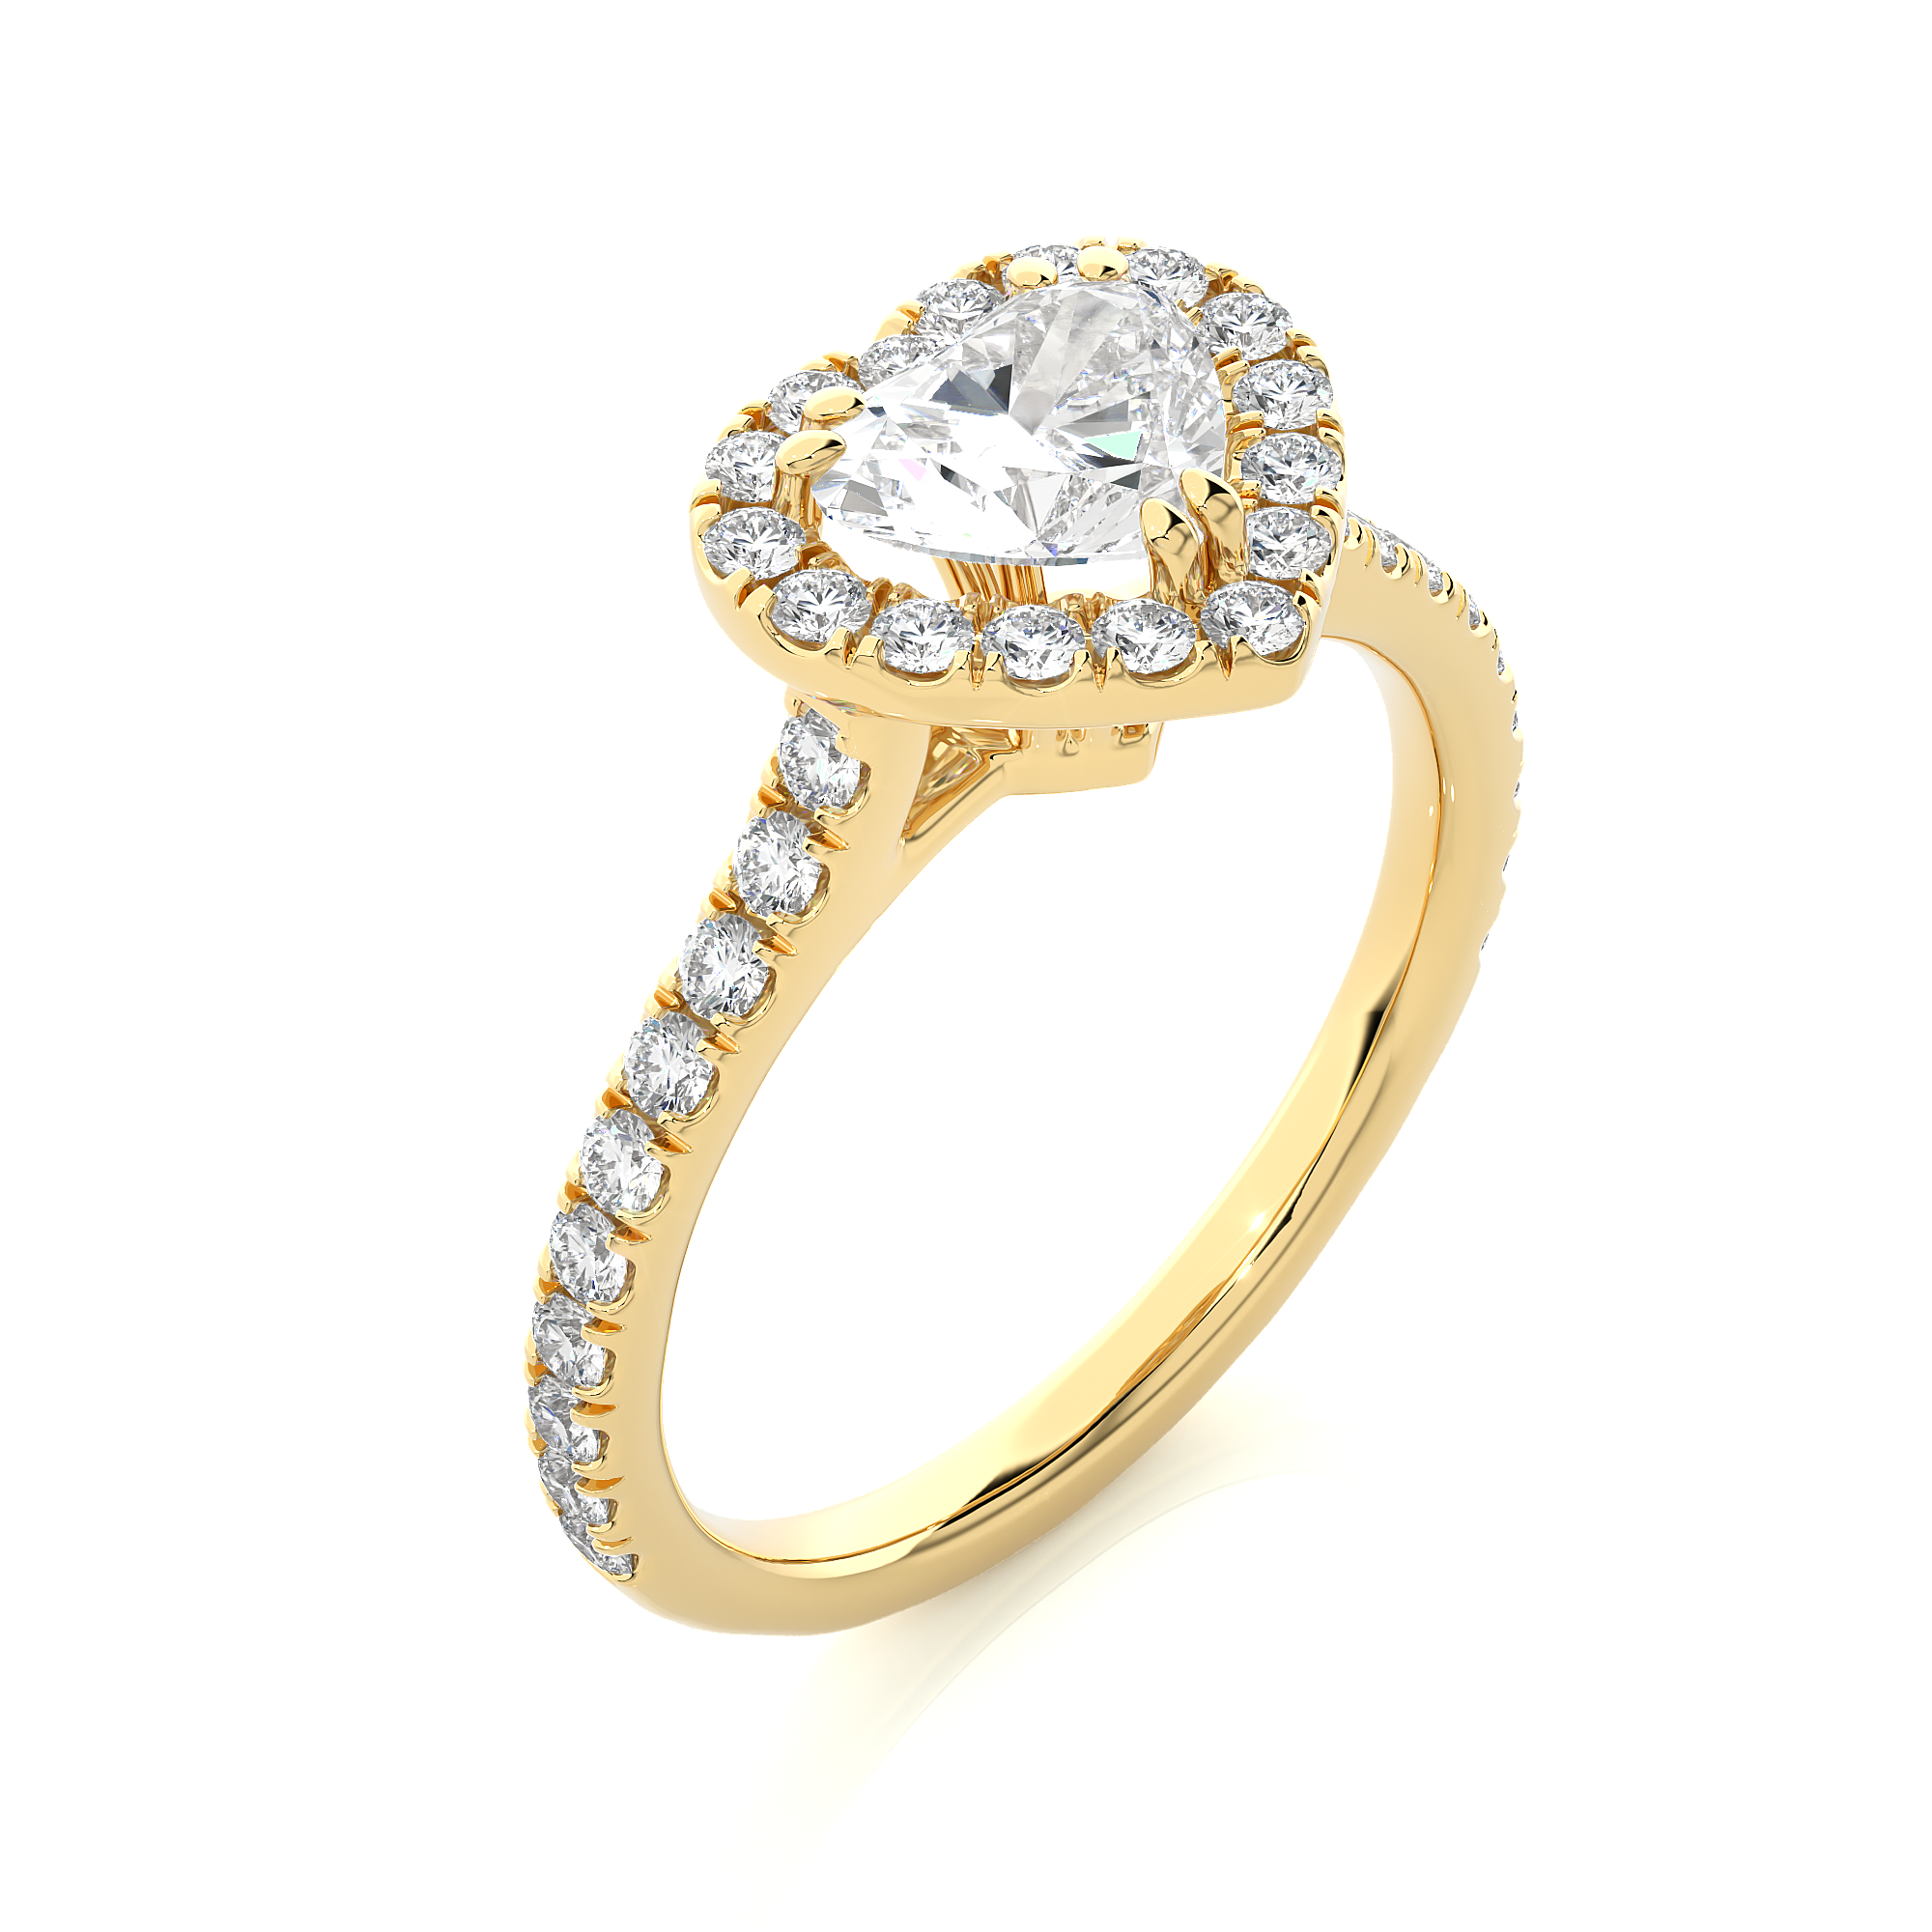 1.33Ct Heart Shaped Solitaire Diamond Ring in 14Kt Yellow Gold - Blu Diamonds